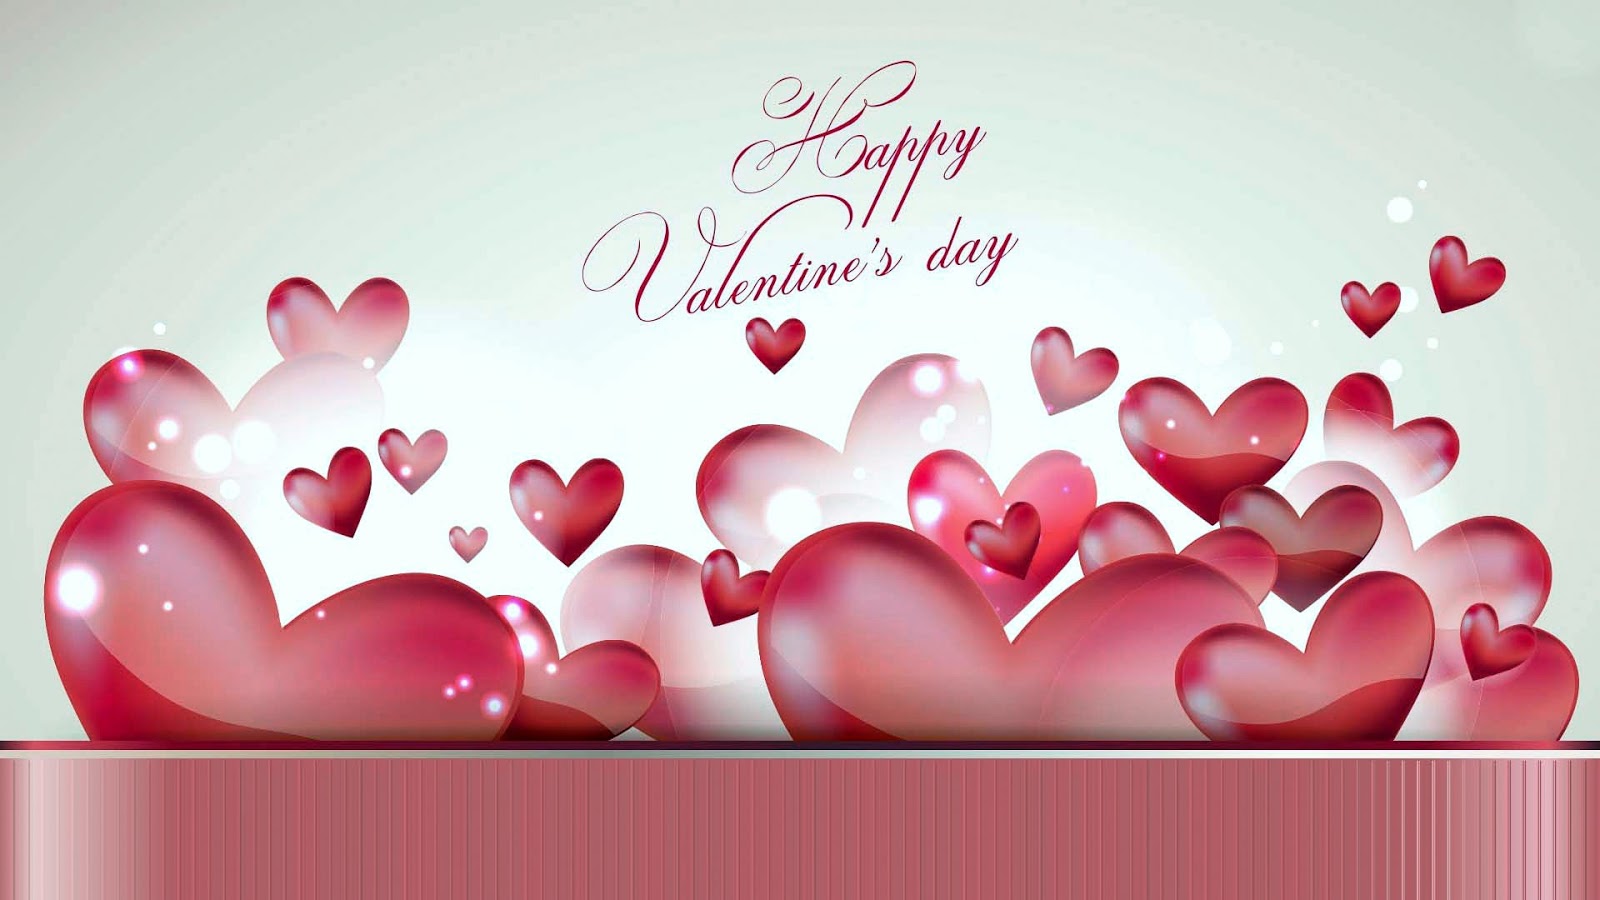 Beautiful HD Wallpapers Valentines Day 2016